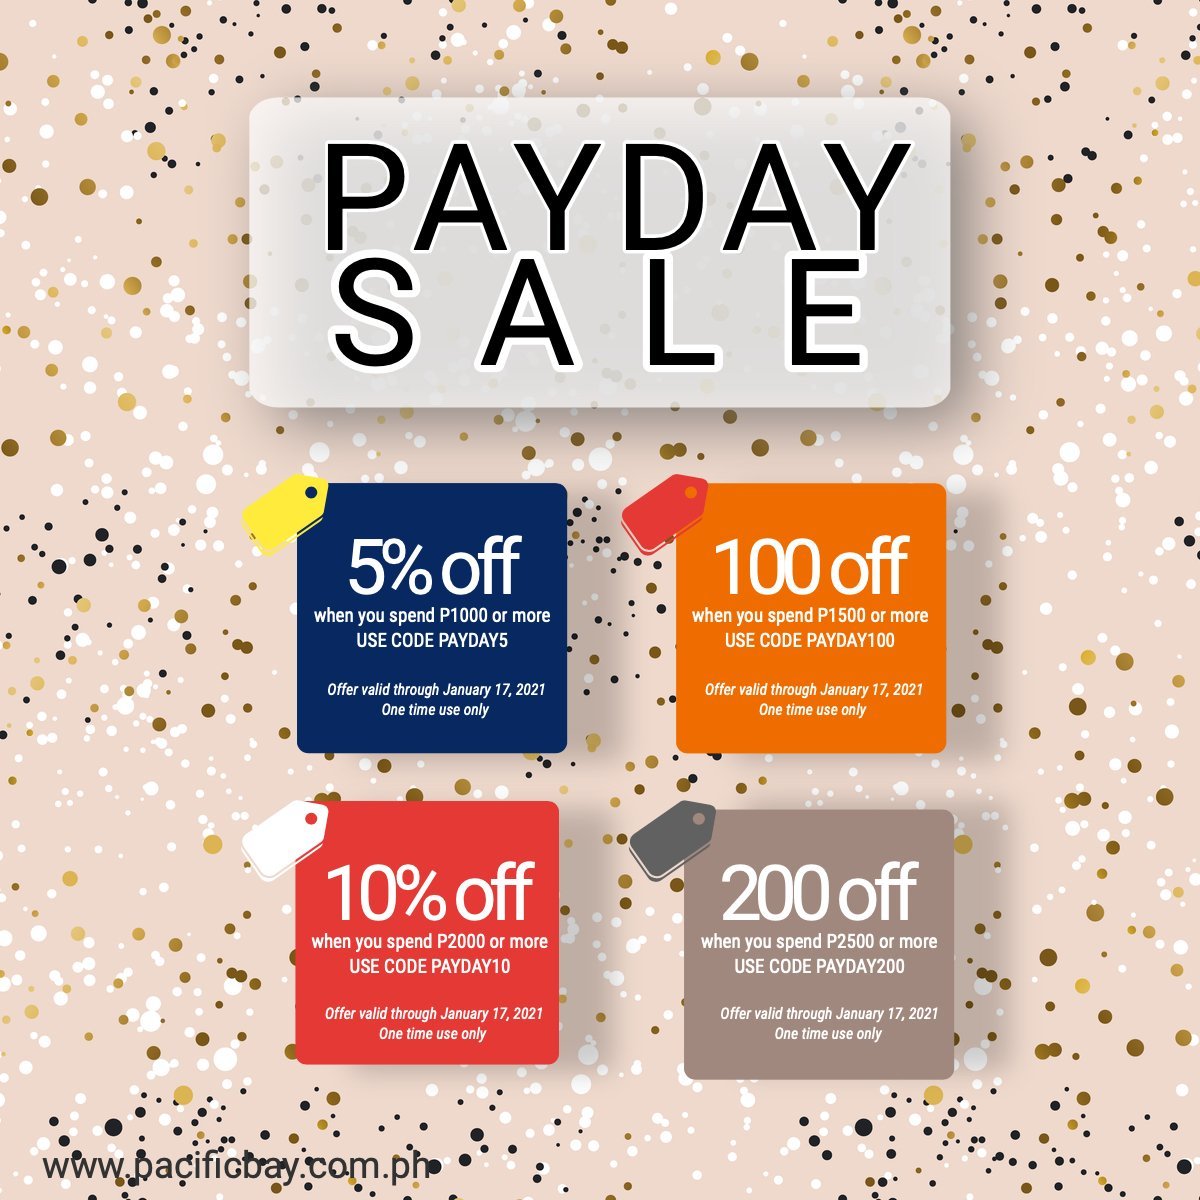 PAYDAY SALE - Pacific Bay